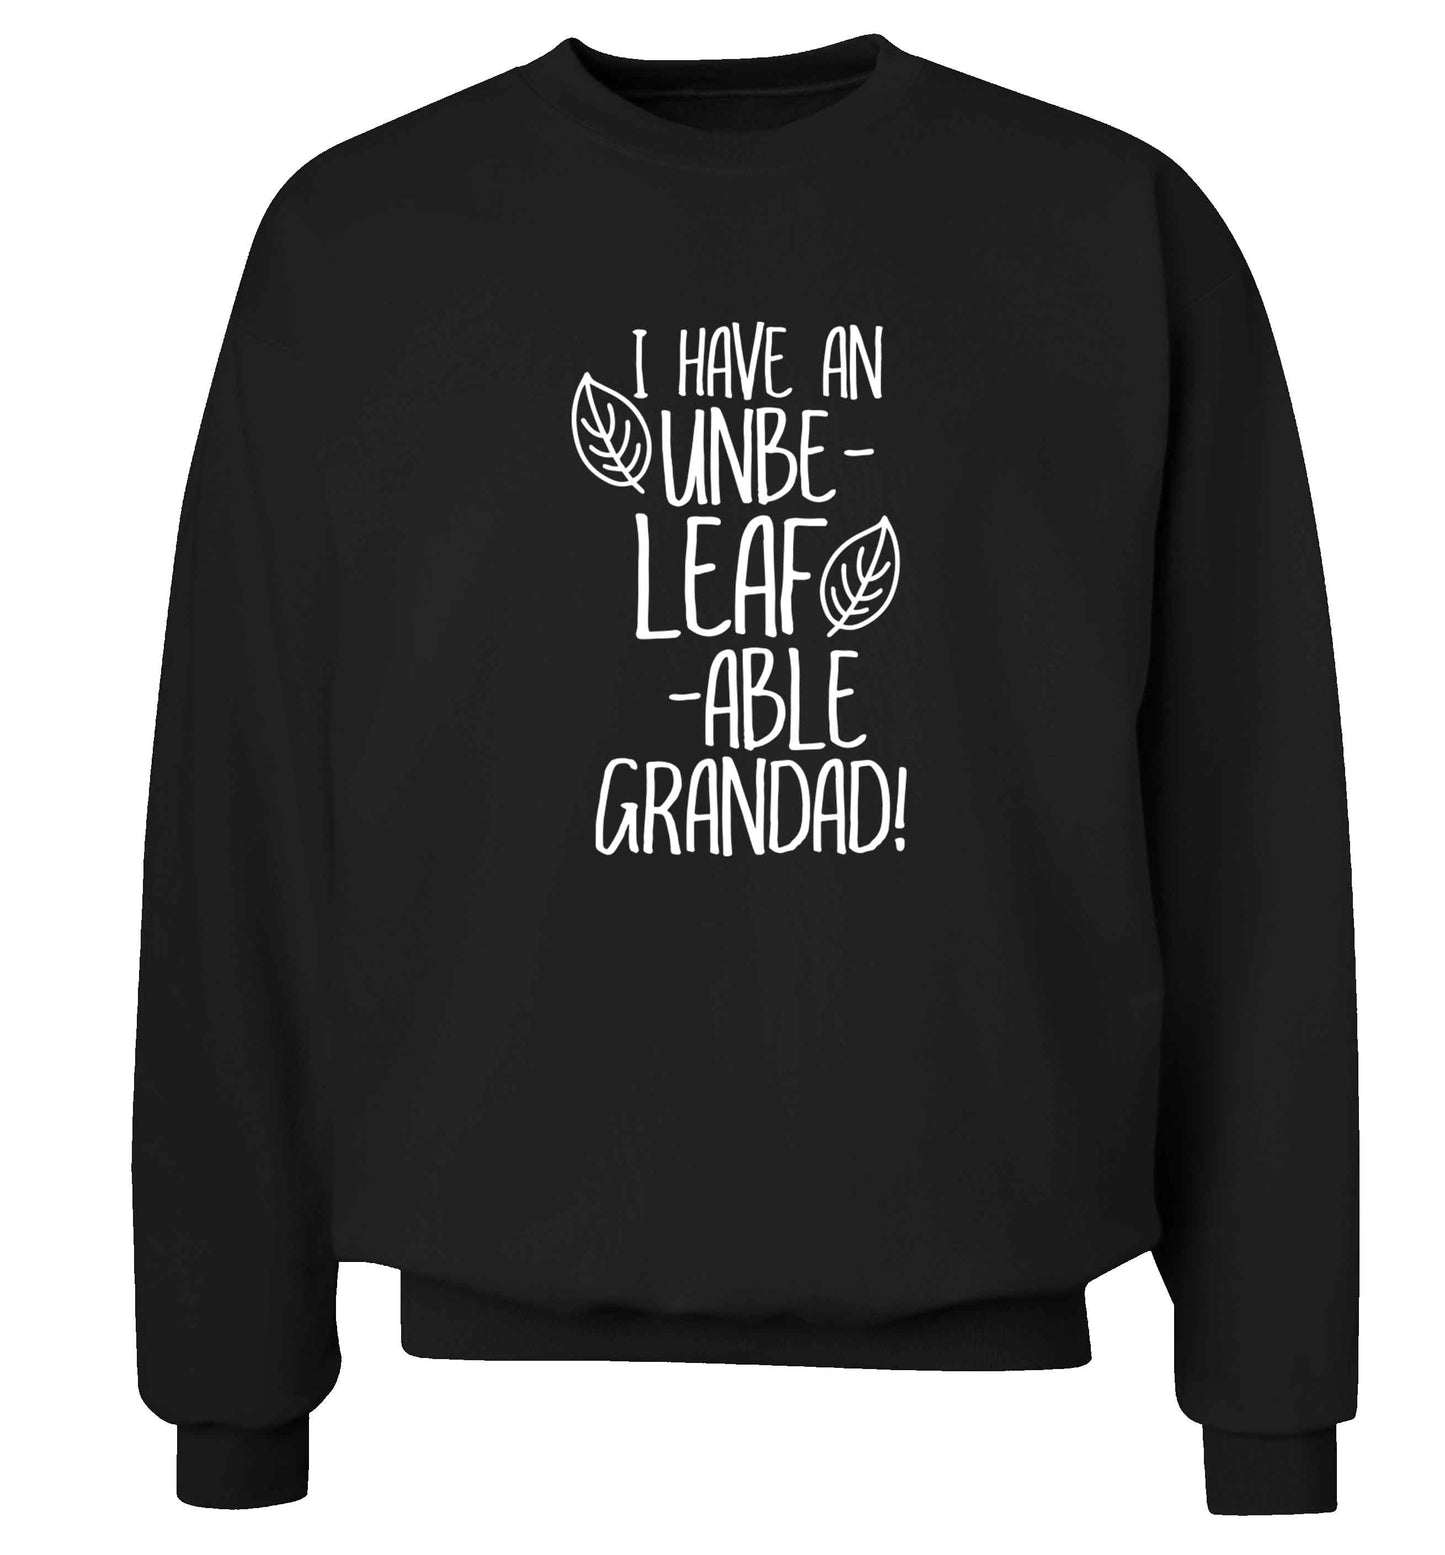 I have an unbe-leaf-able grandad Adult's unisex black Sweater 2XL